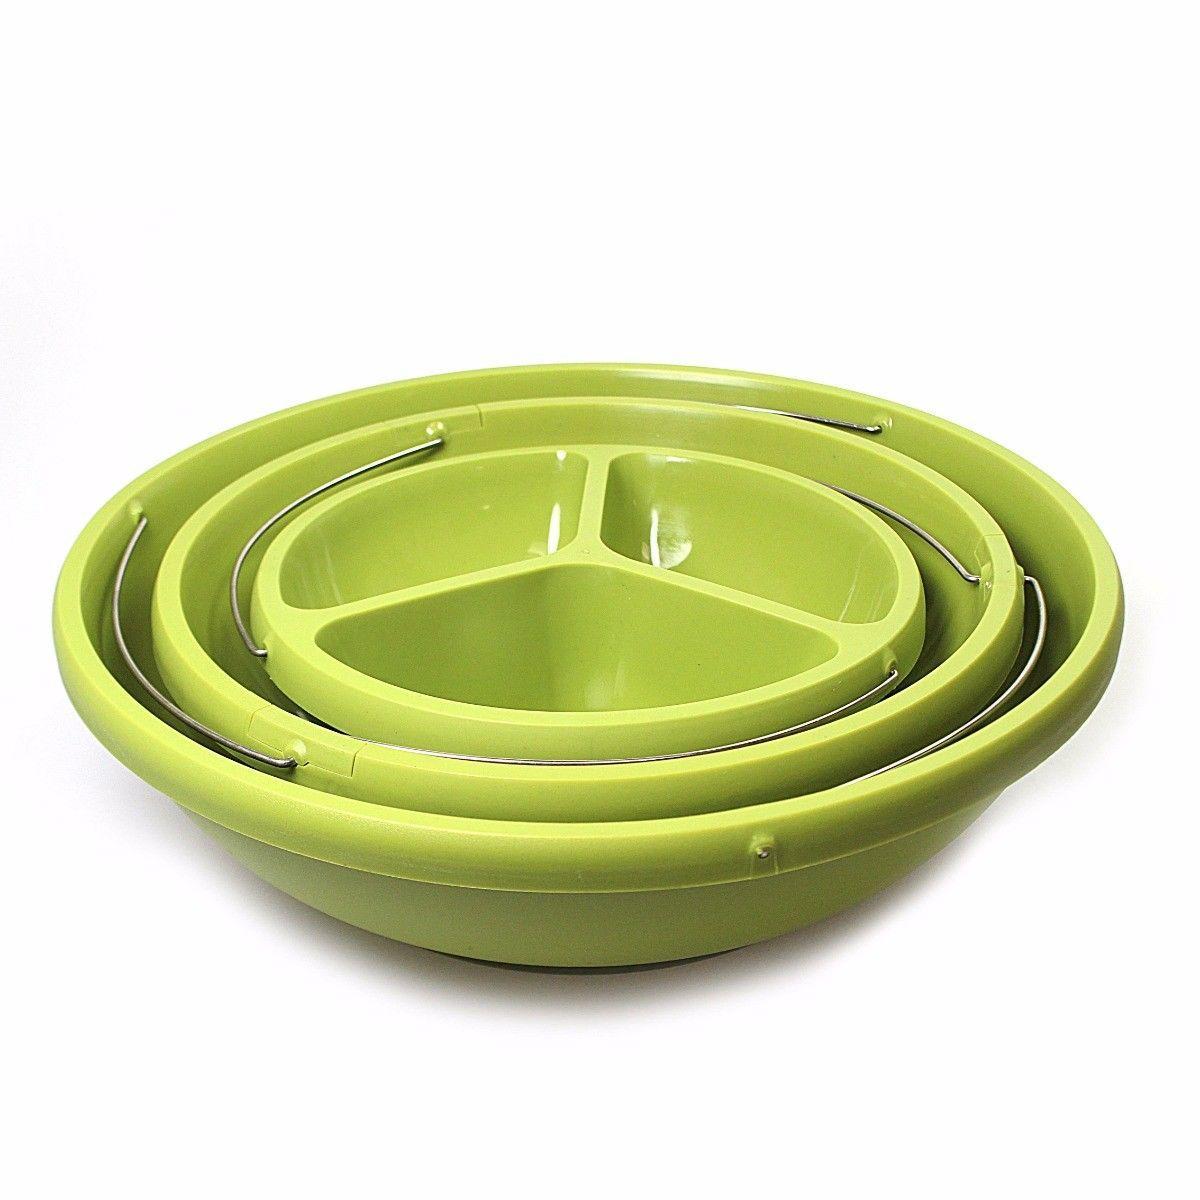 Twist Fold Party Bowl 3 Tiers Party Home Kitchen Outdoors 4512 (Parcel Rate)